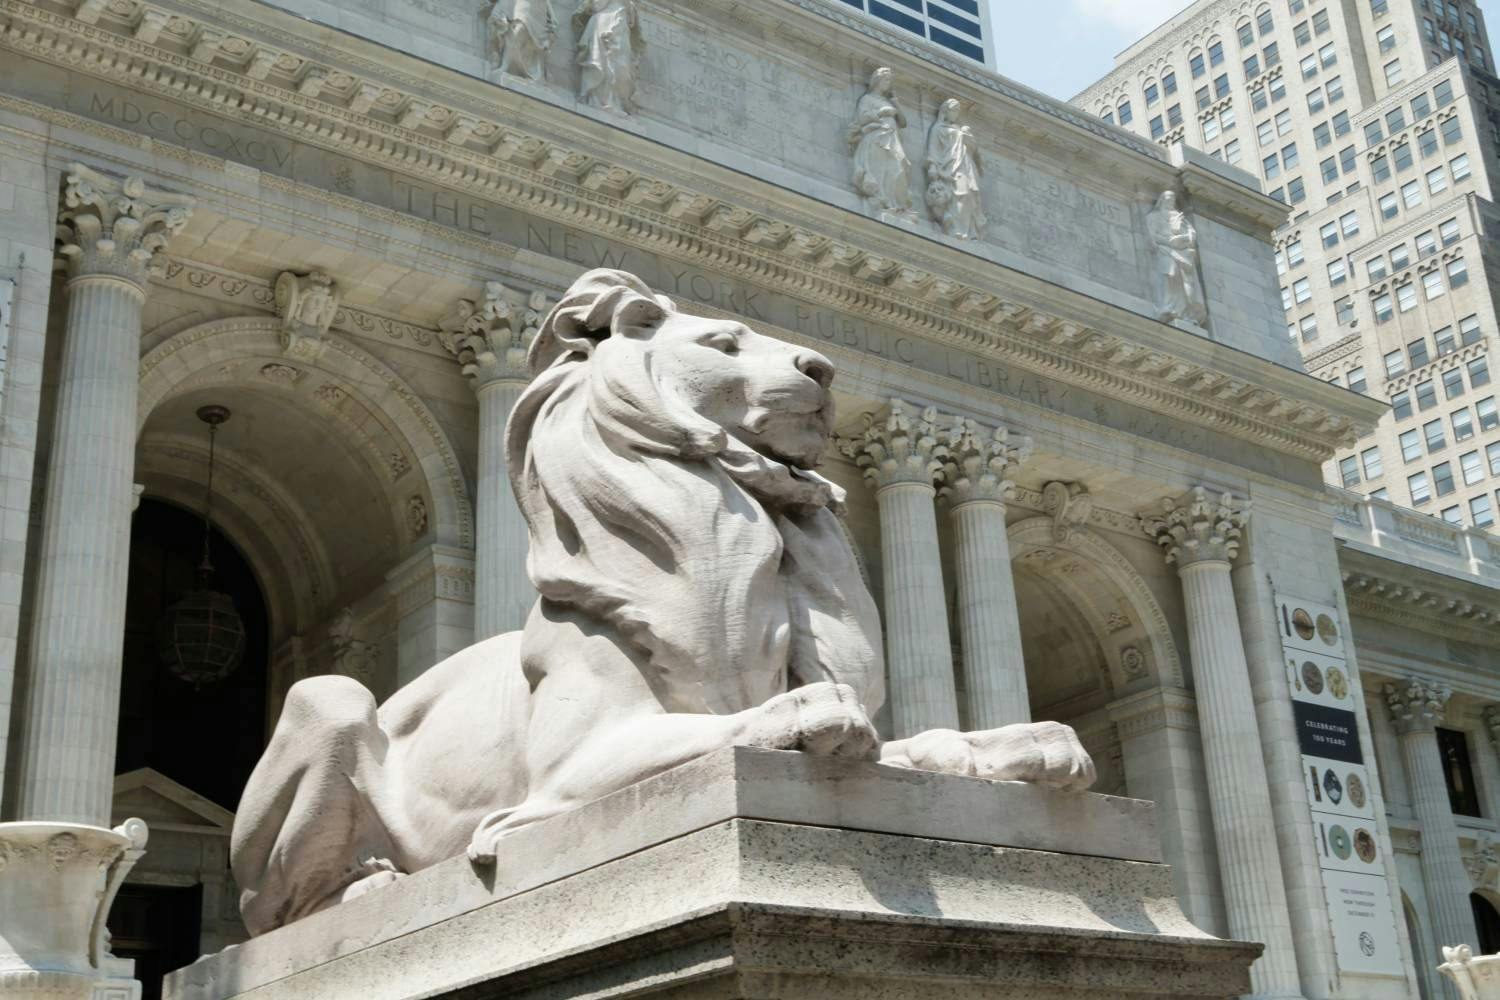 A photograph of The New York Public Library to announce a public talk with Wolfgang Tillmans and Paul Holdengräber, Director of Public Programming at The New York Public Library, dated 2018.